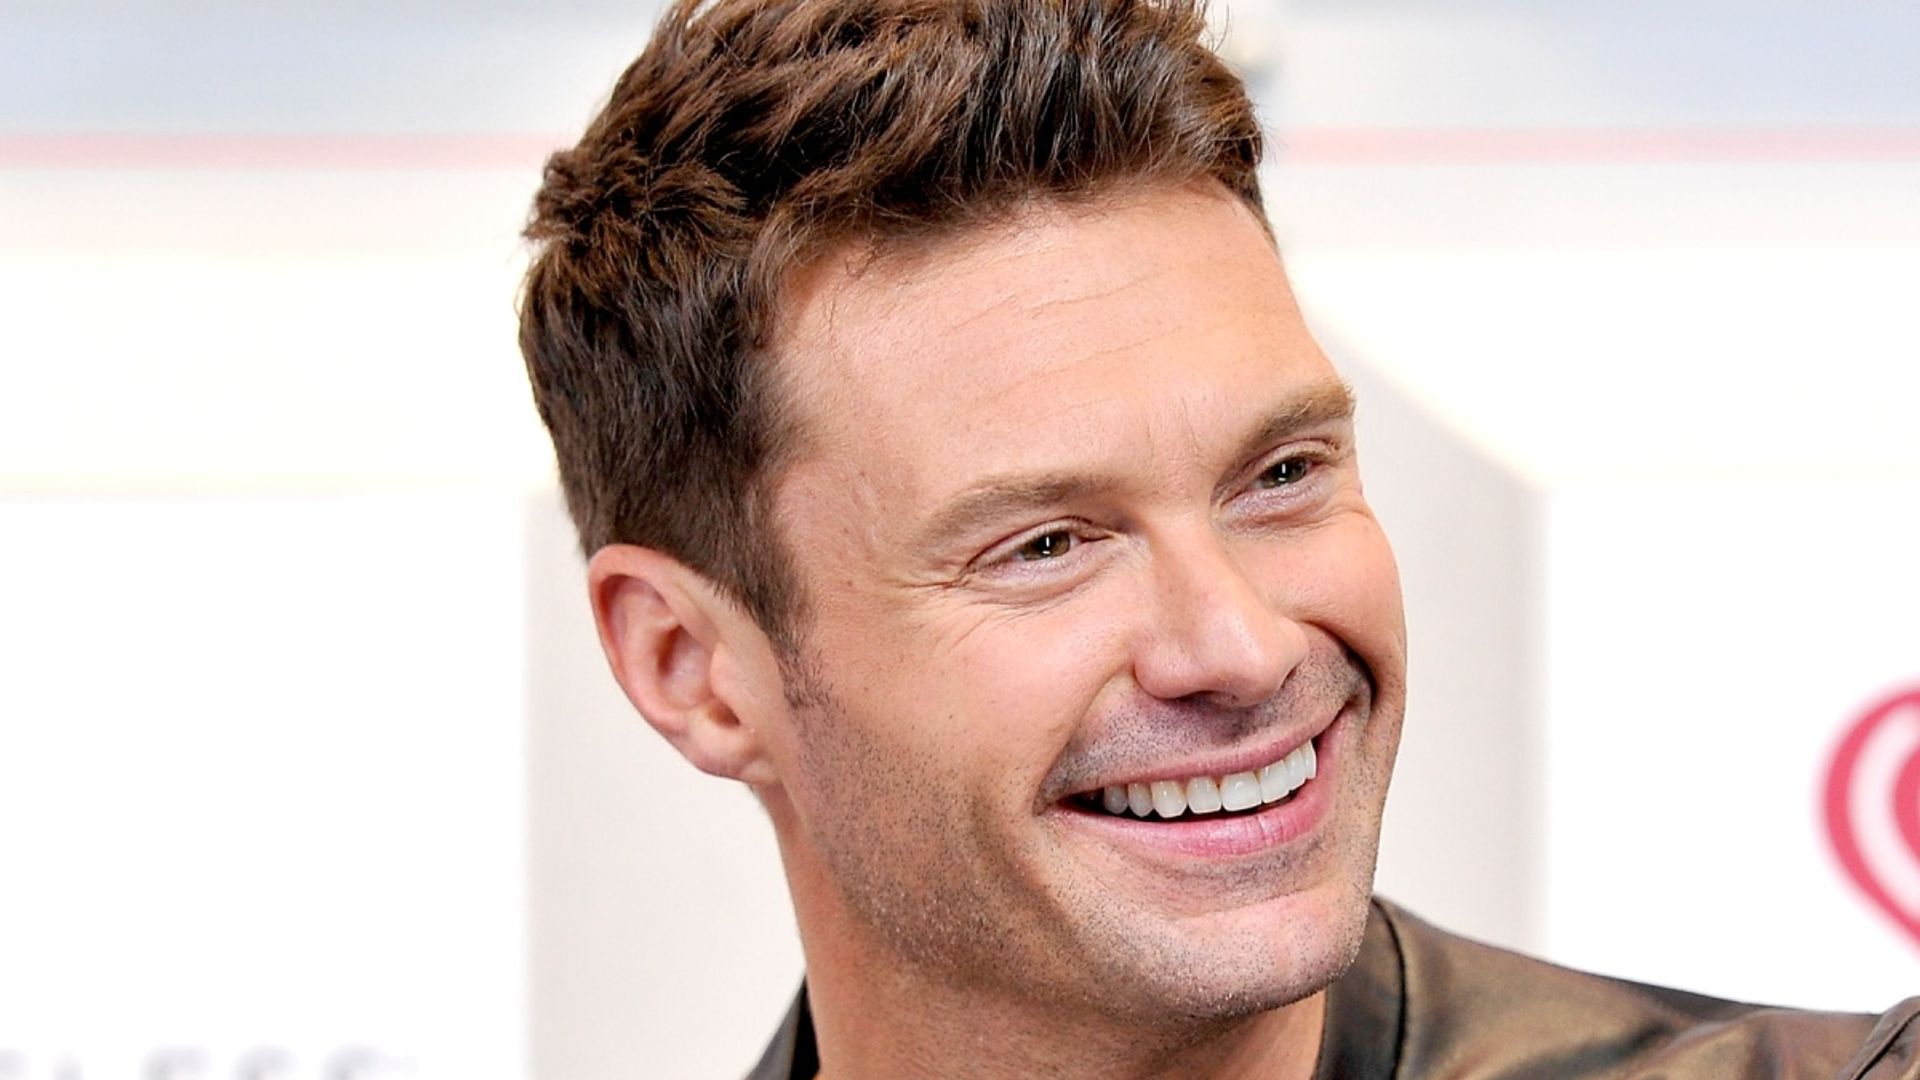 Ryan Seacrest admits terrifying on-air health scare forced him to make changes